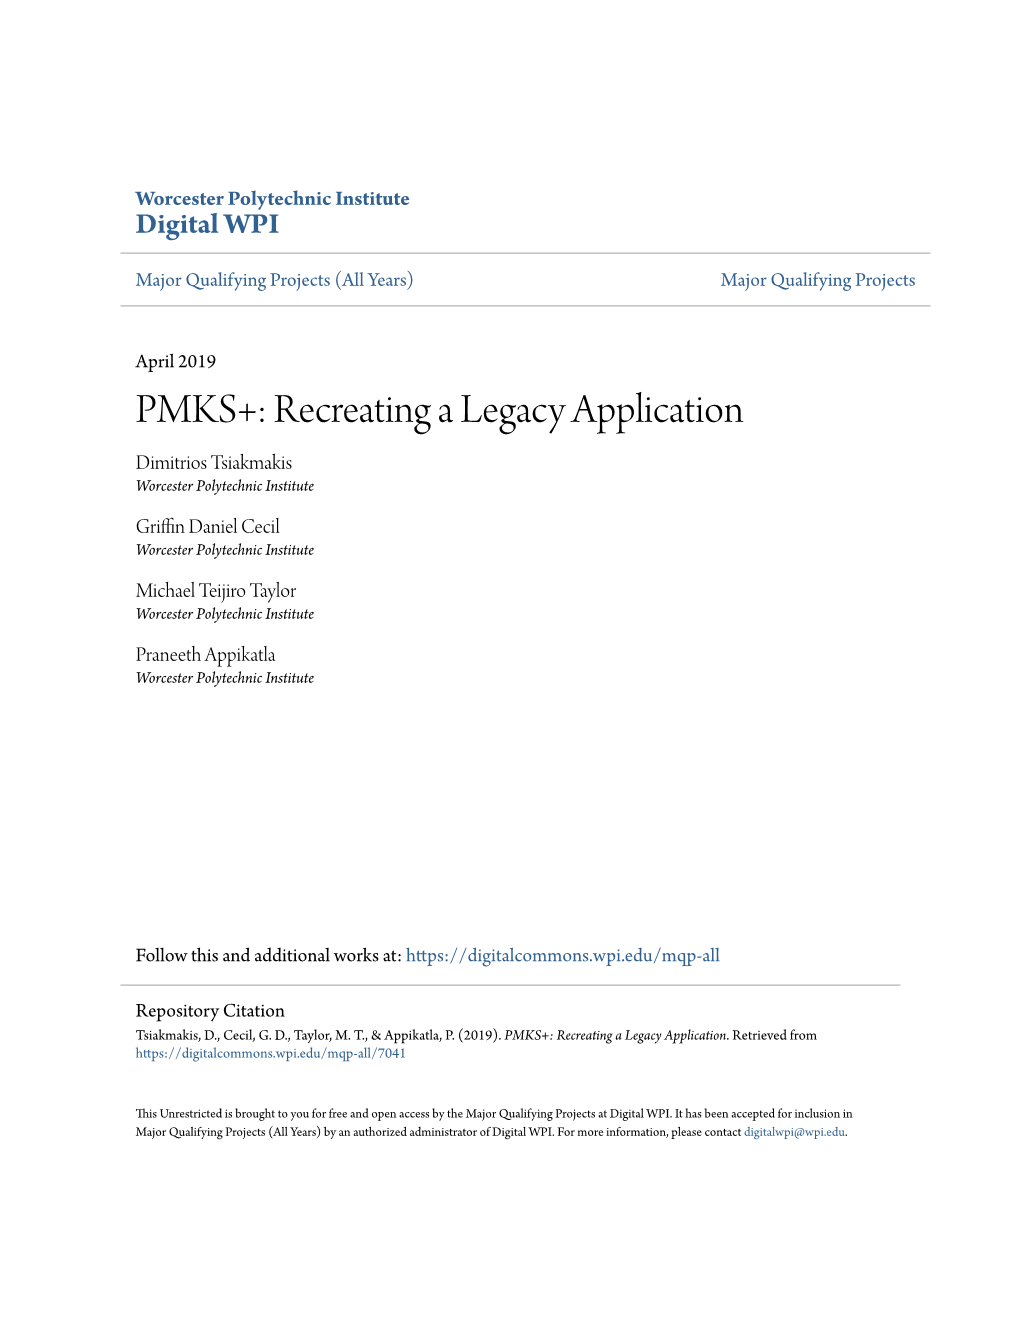 PMKS+: Recreating a Legacy Application Dimitrios Tsiakmakis Worcester Polytechnic Institute